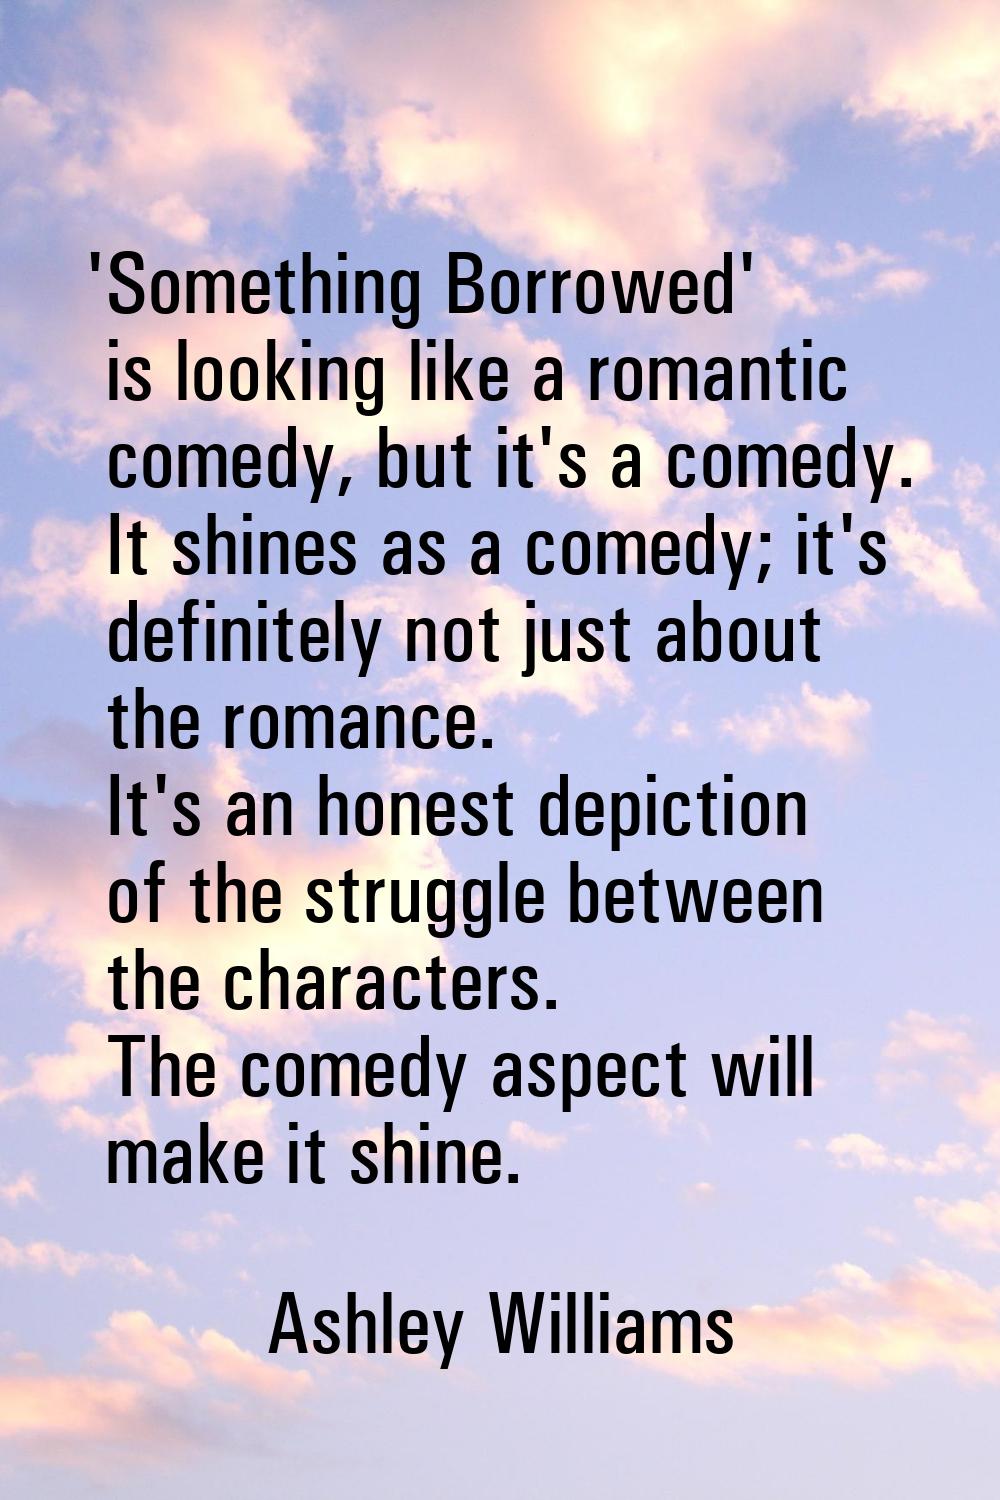 'Something Borrowed' is looking like a romantic comedy, but it's a comedy. It shines as a comedy; i